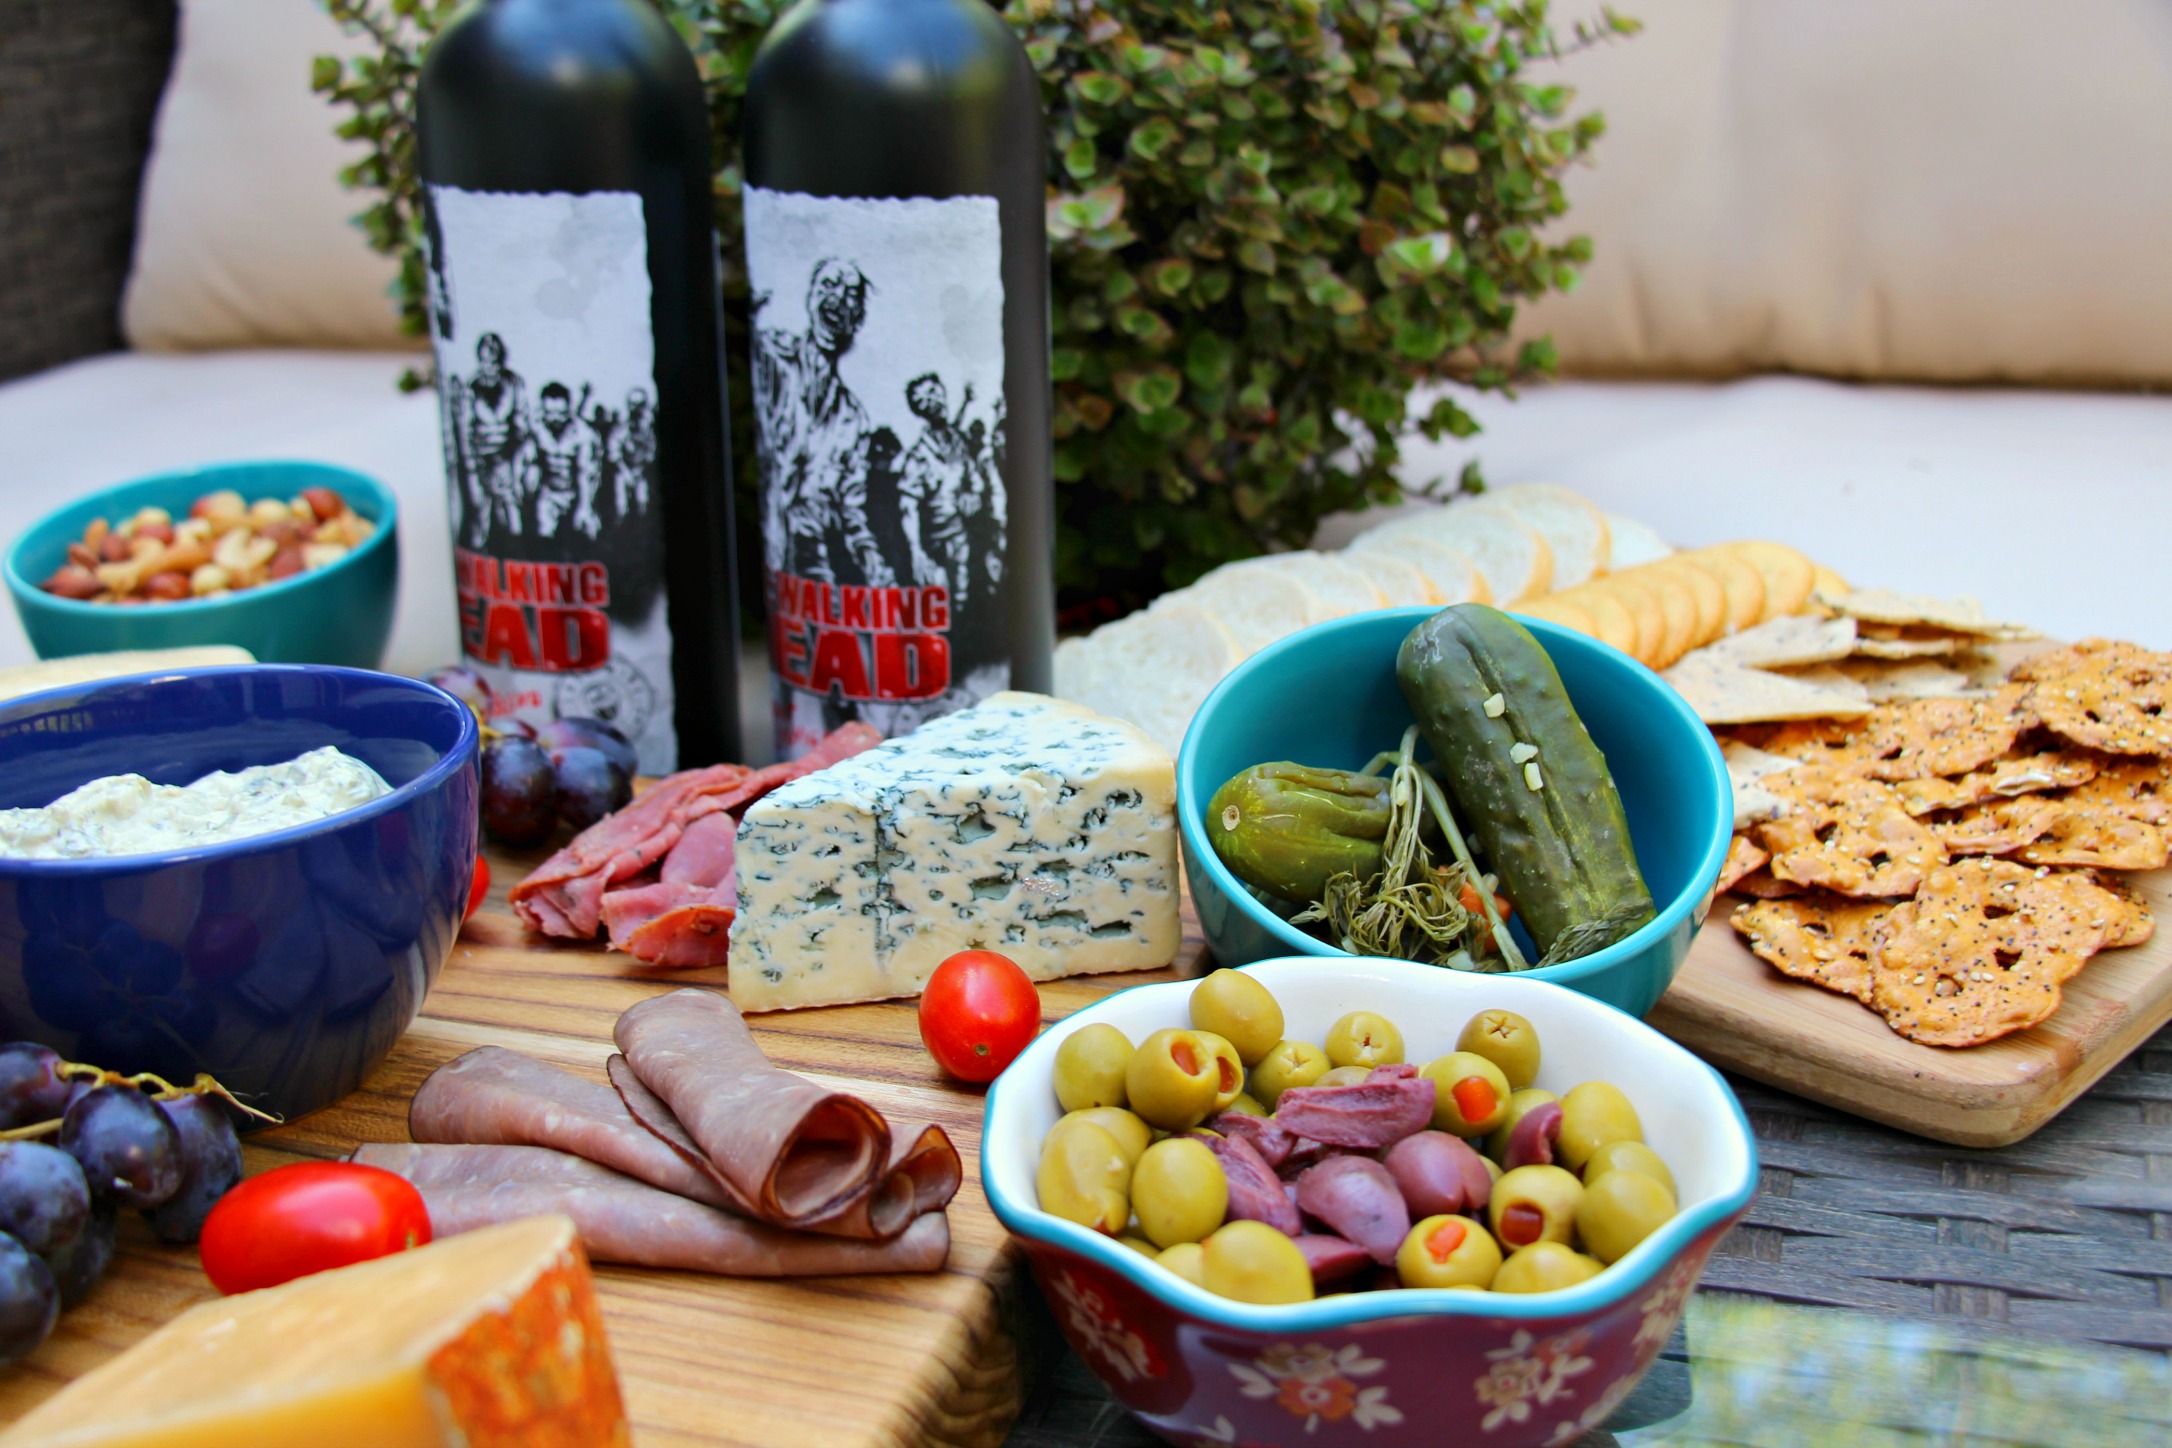 How To Host A Simple Wine & Cheese Party